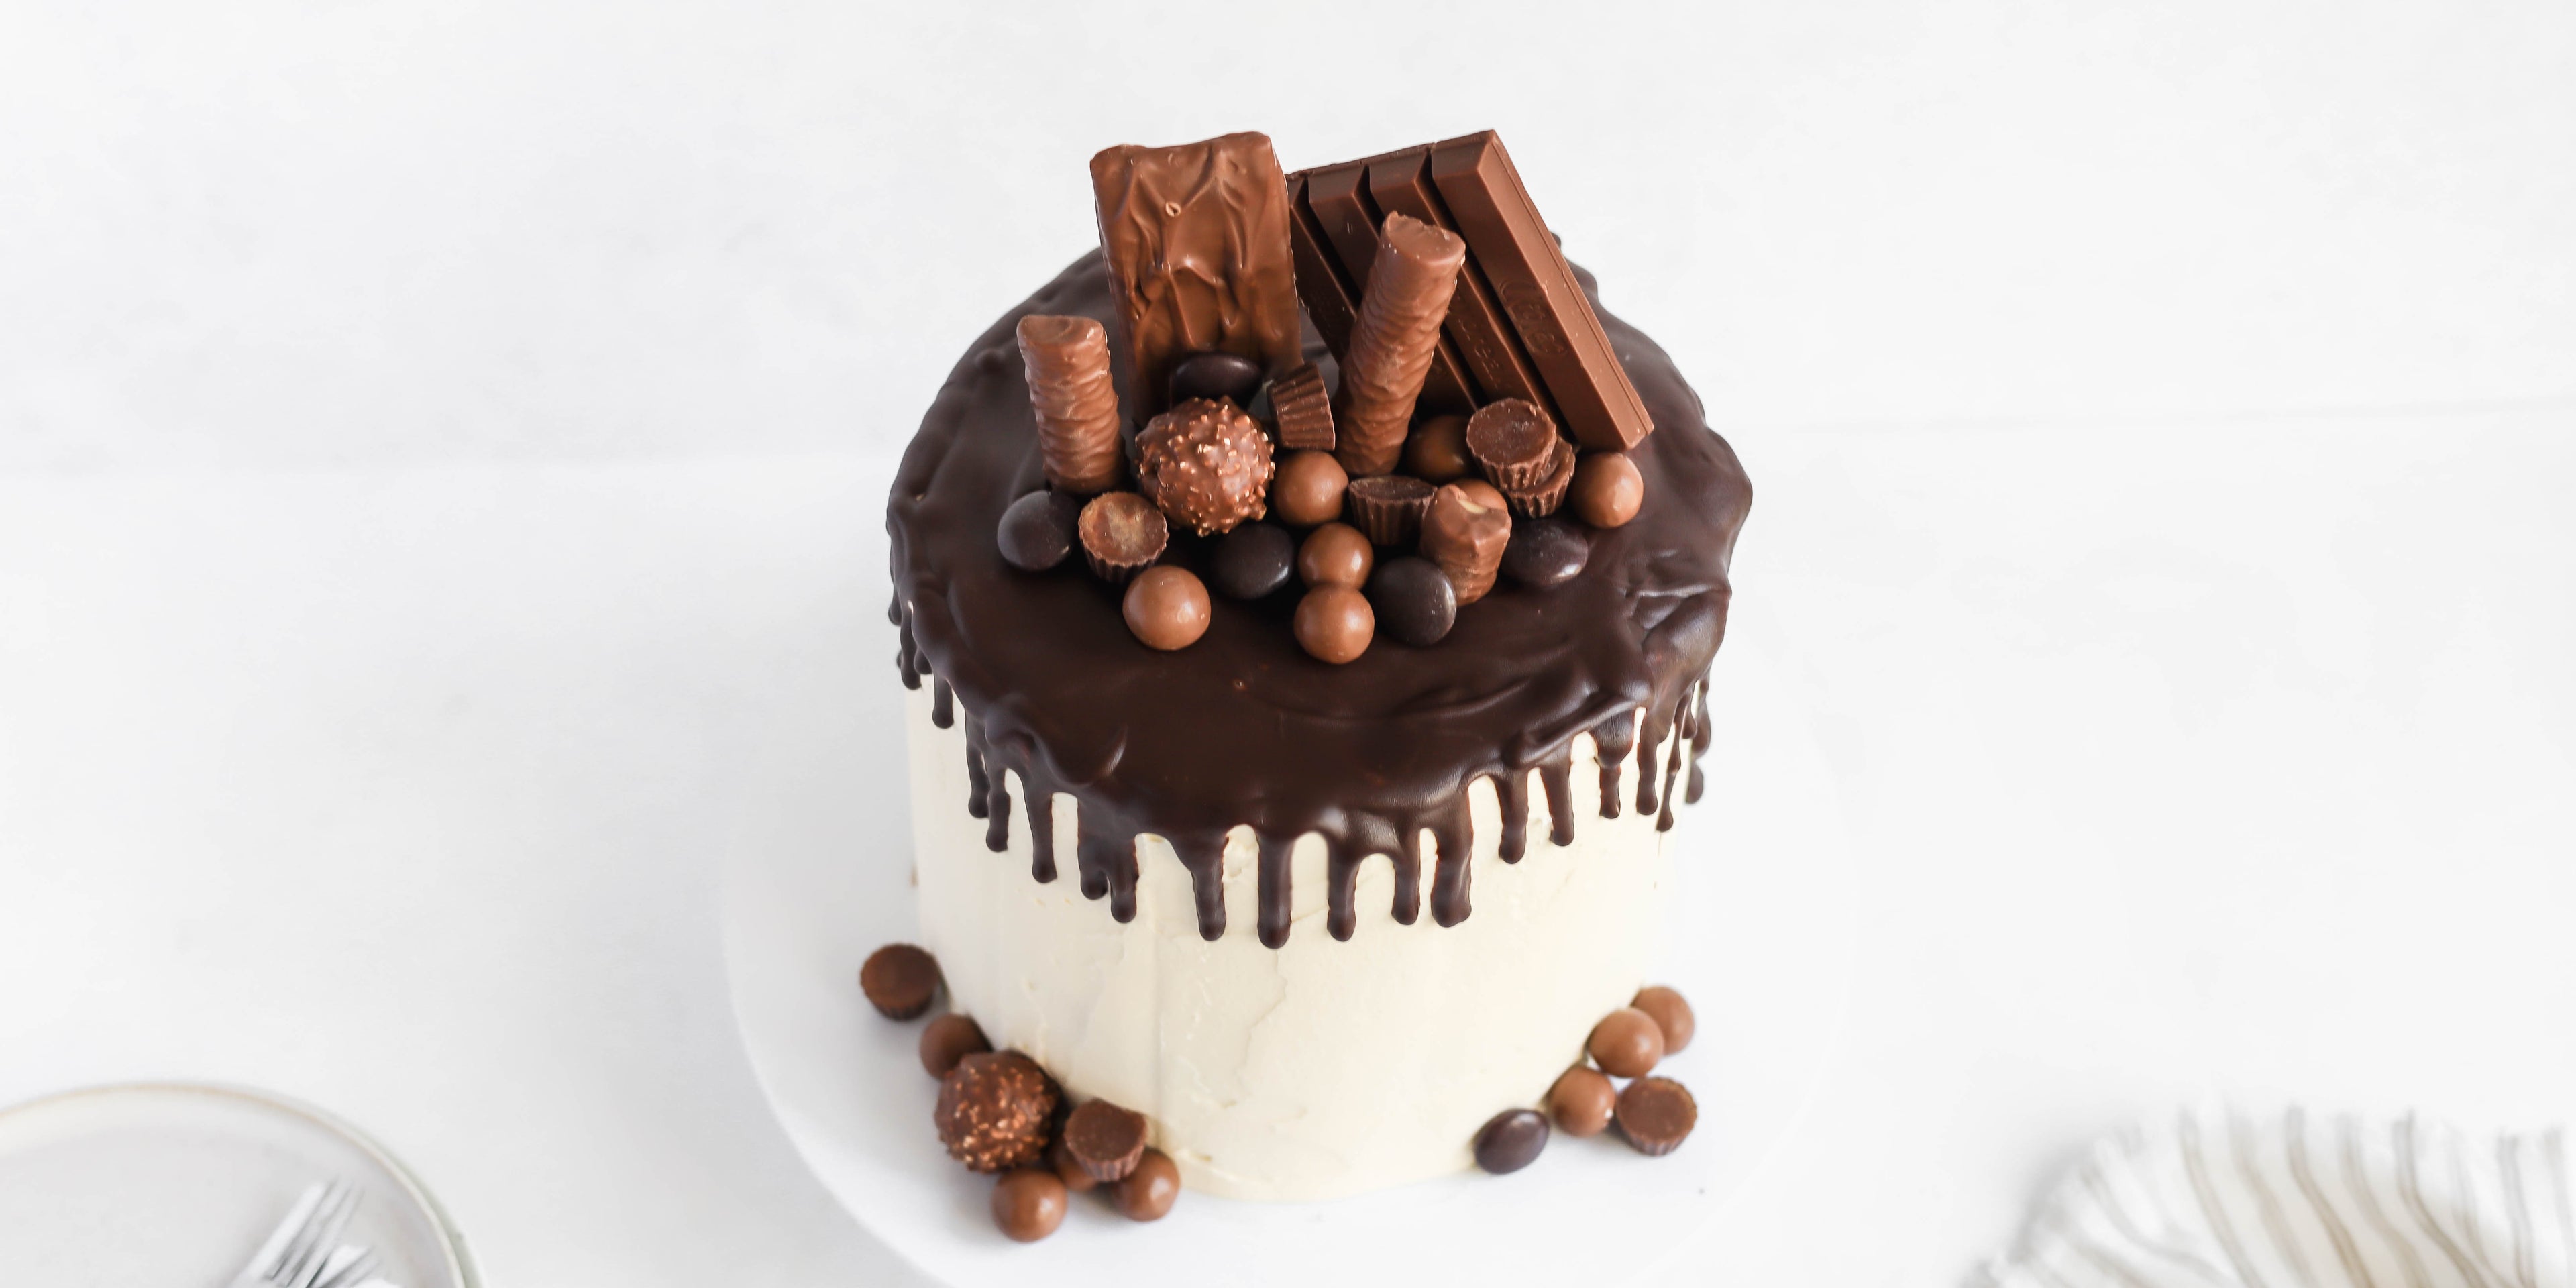 Top view of Ultimate Birthday Drip Cake topped with chocolate goodies